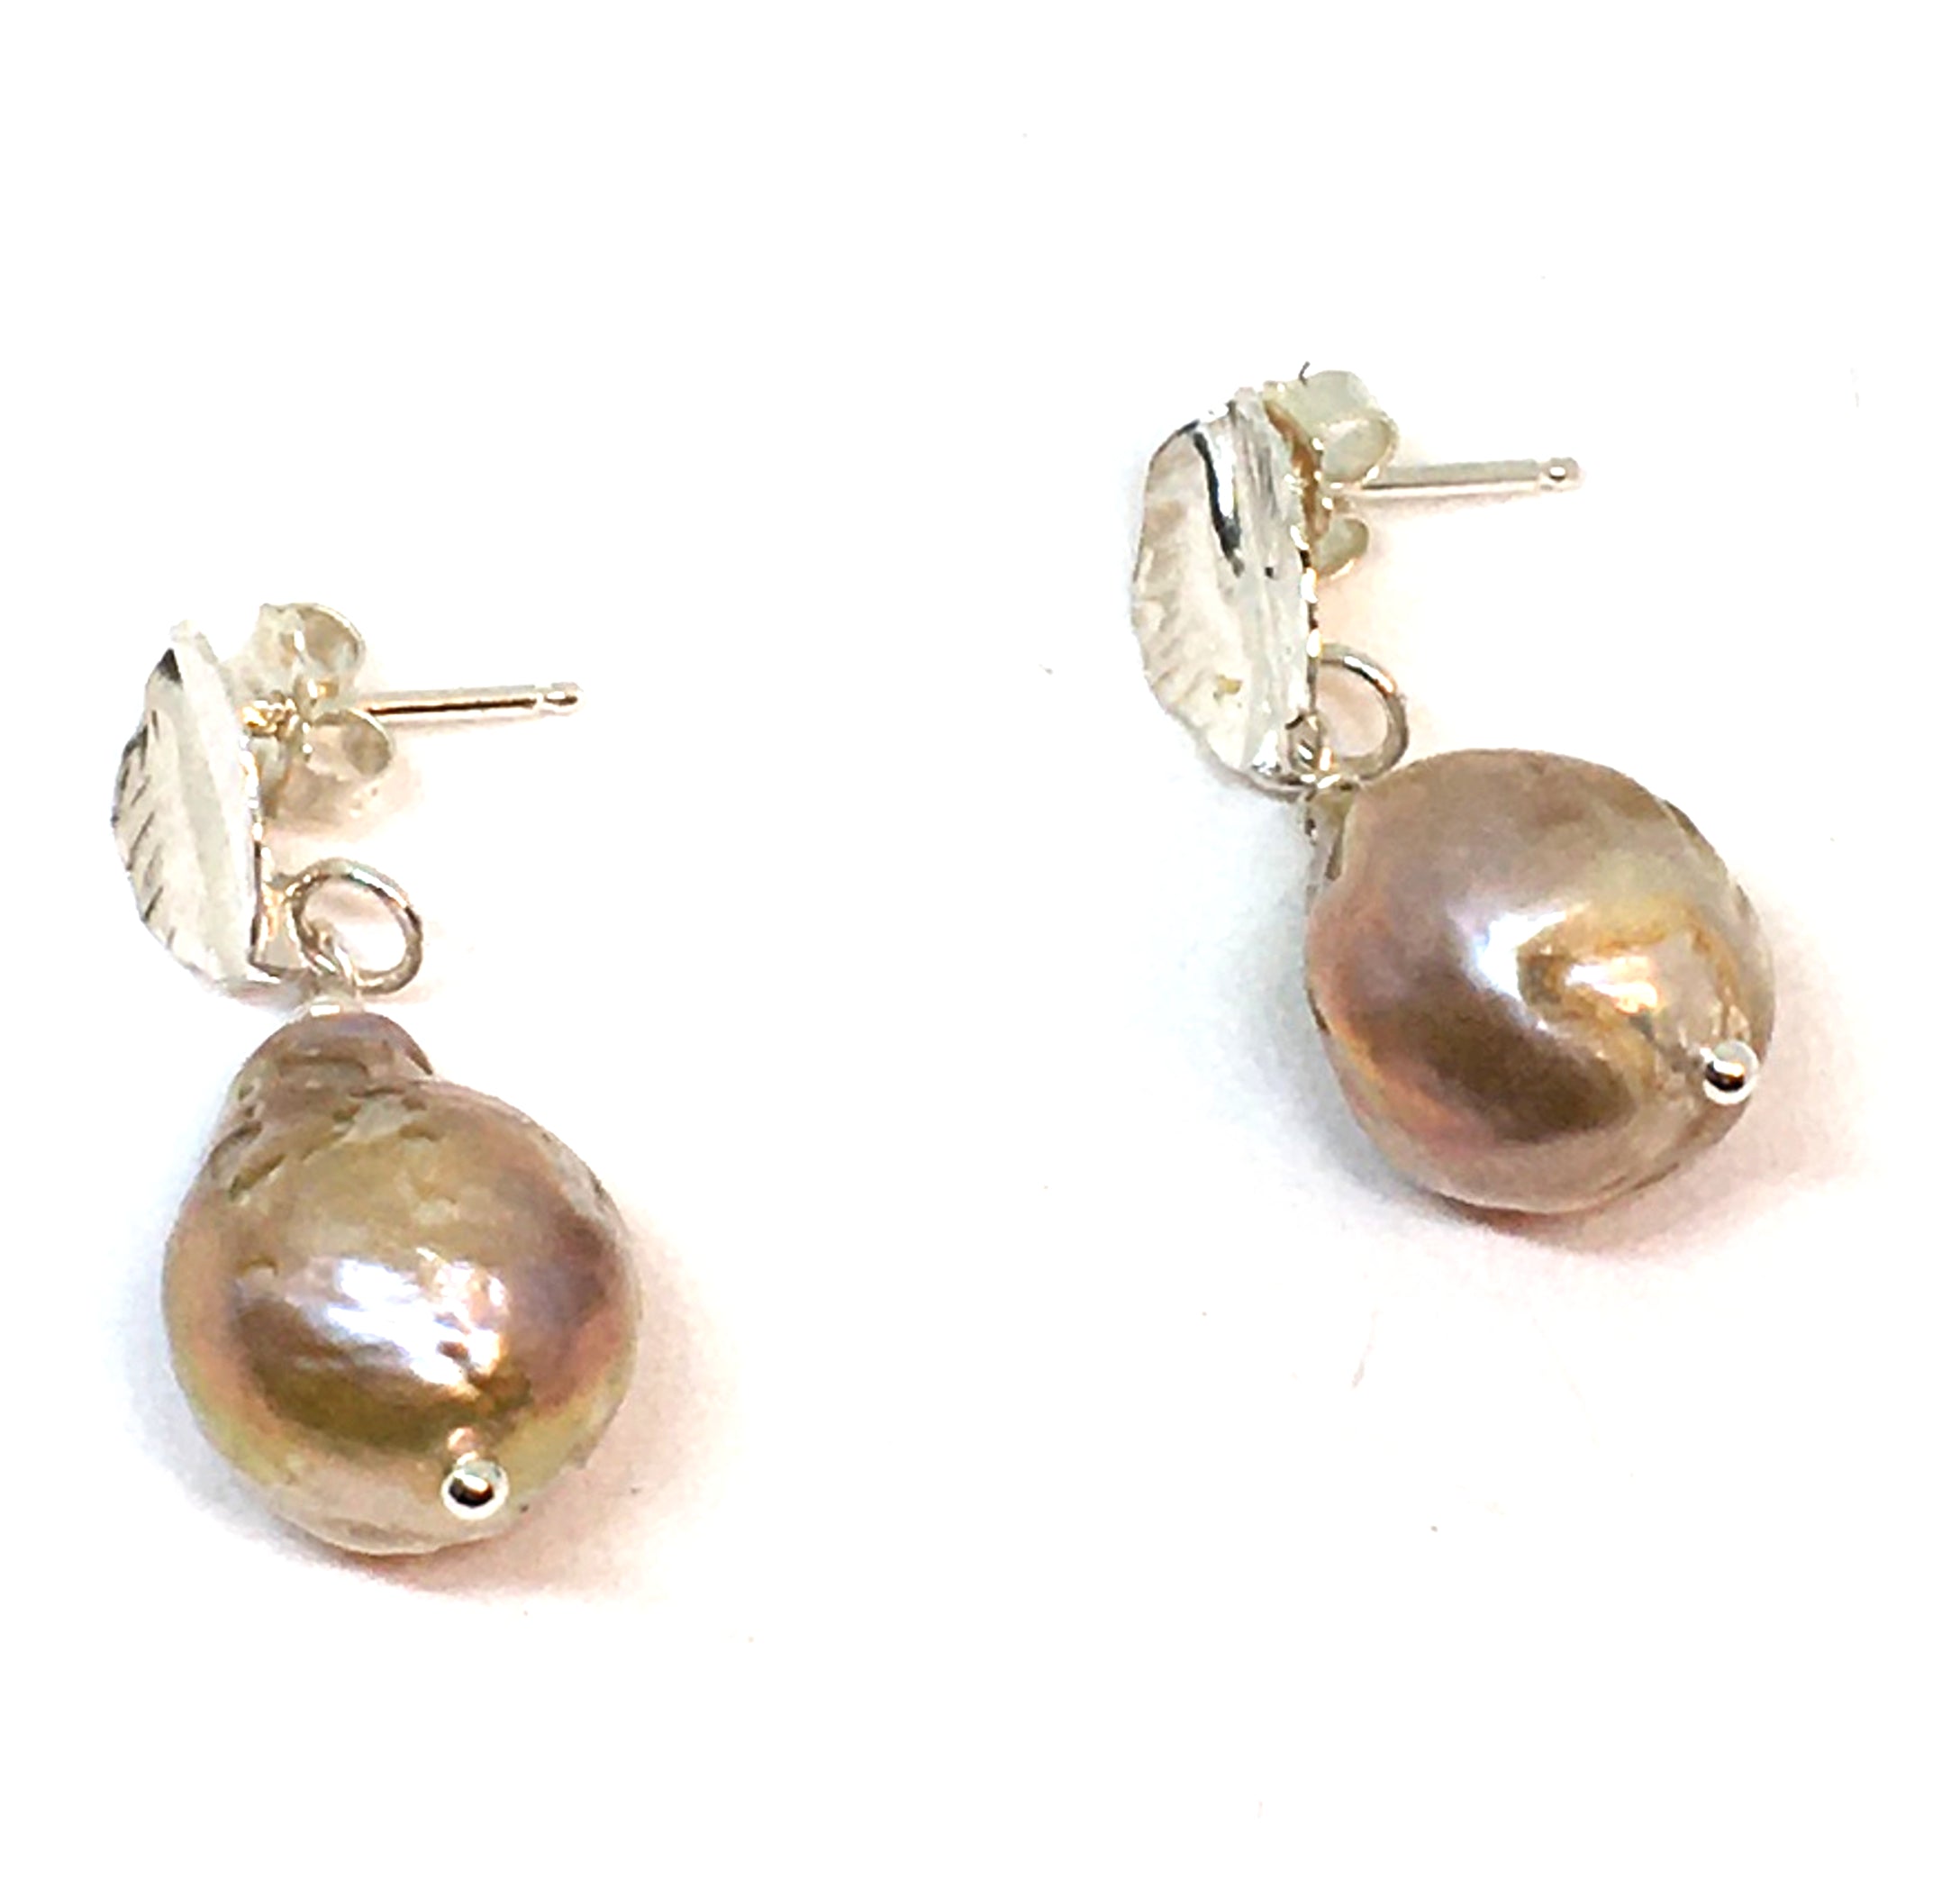 Fireball Pearl Drop Earrings with Hand Forged Silver Leaves